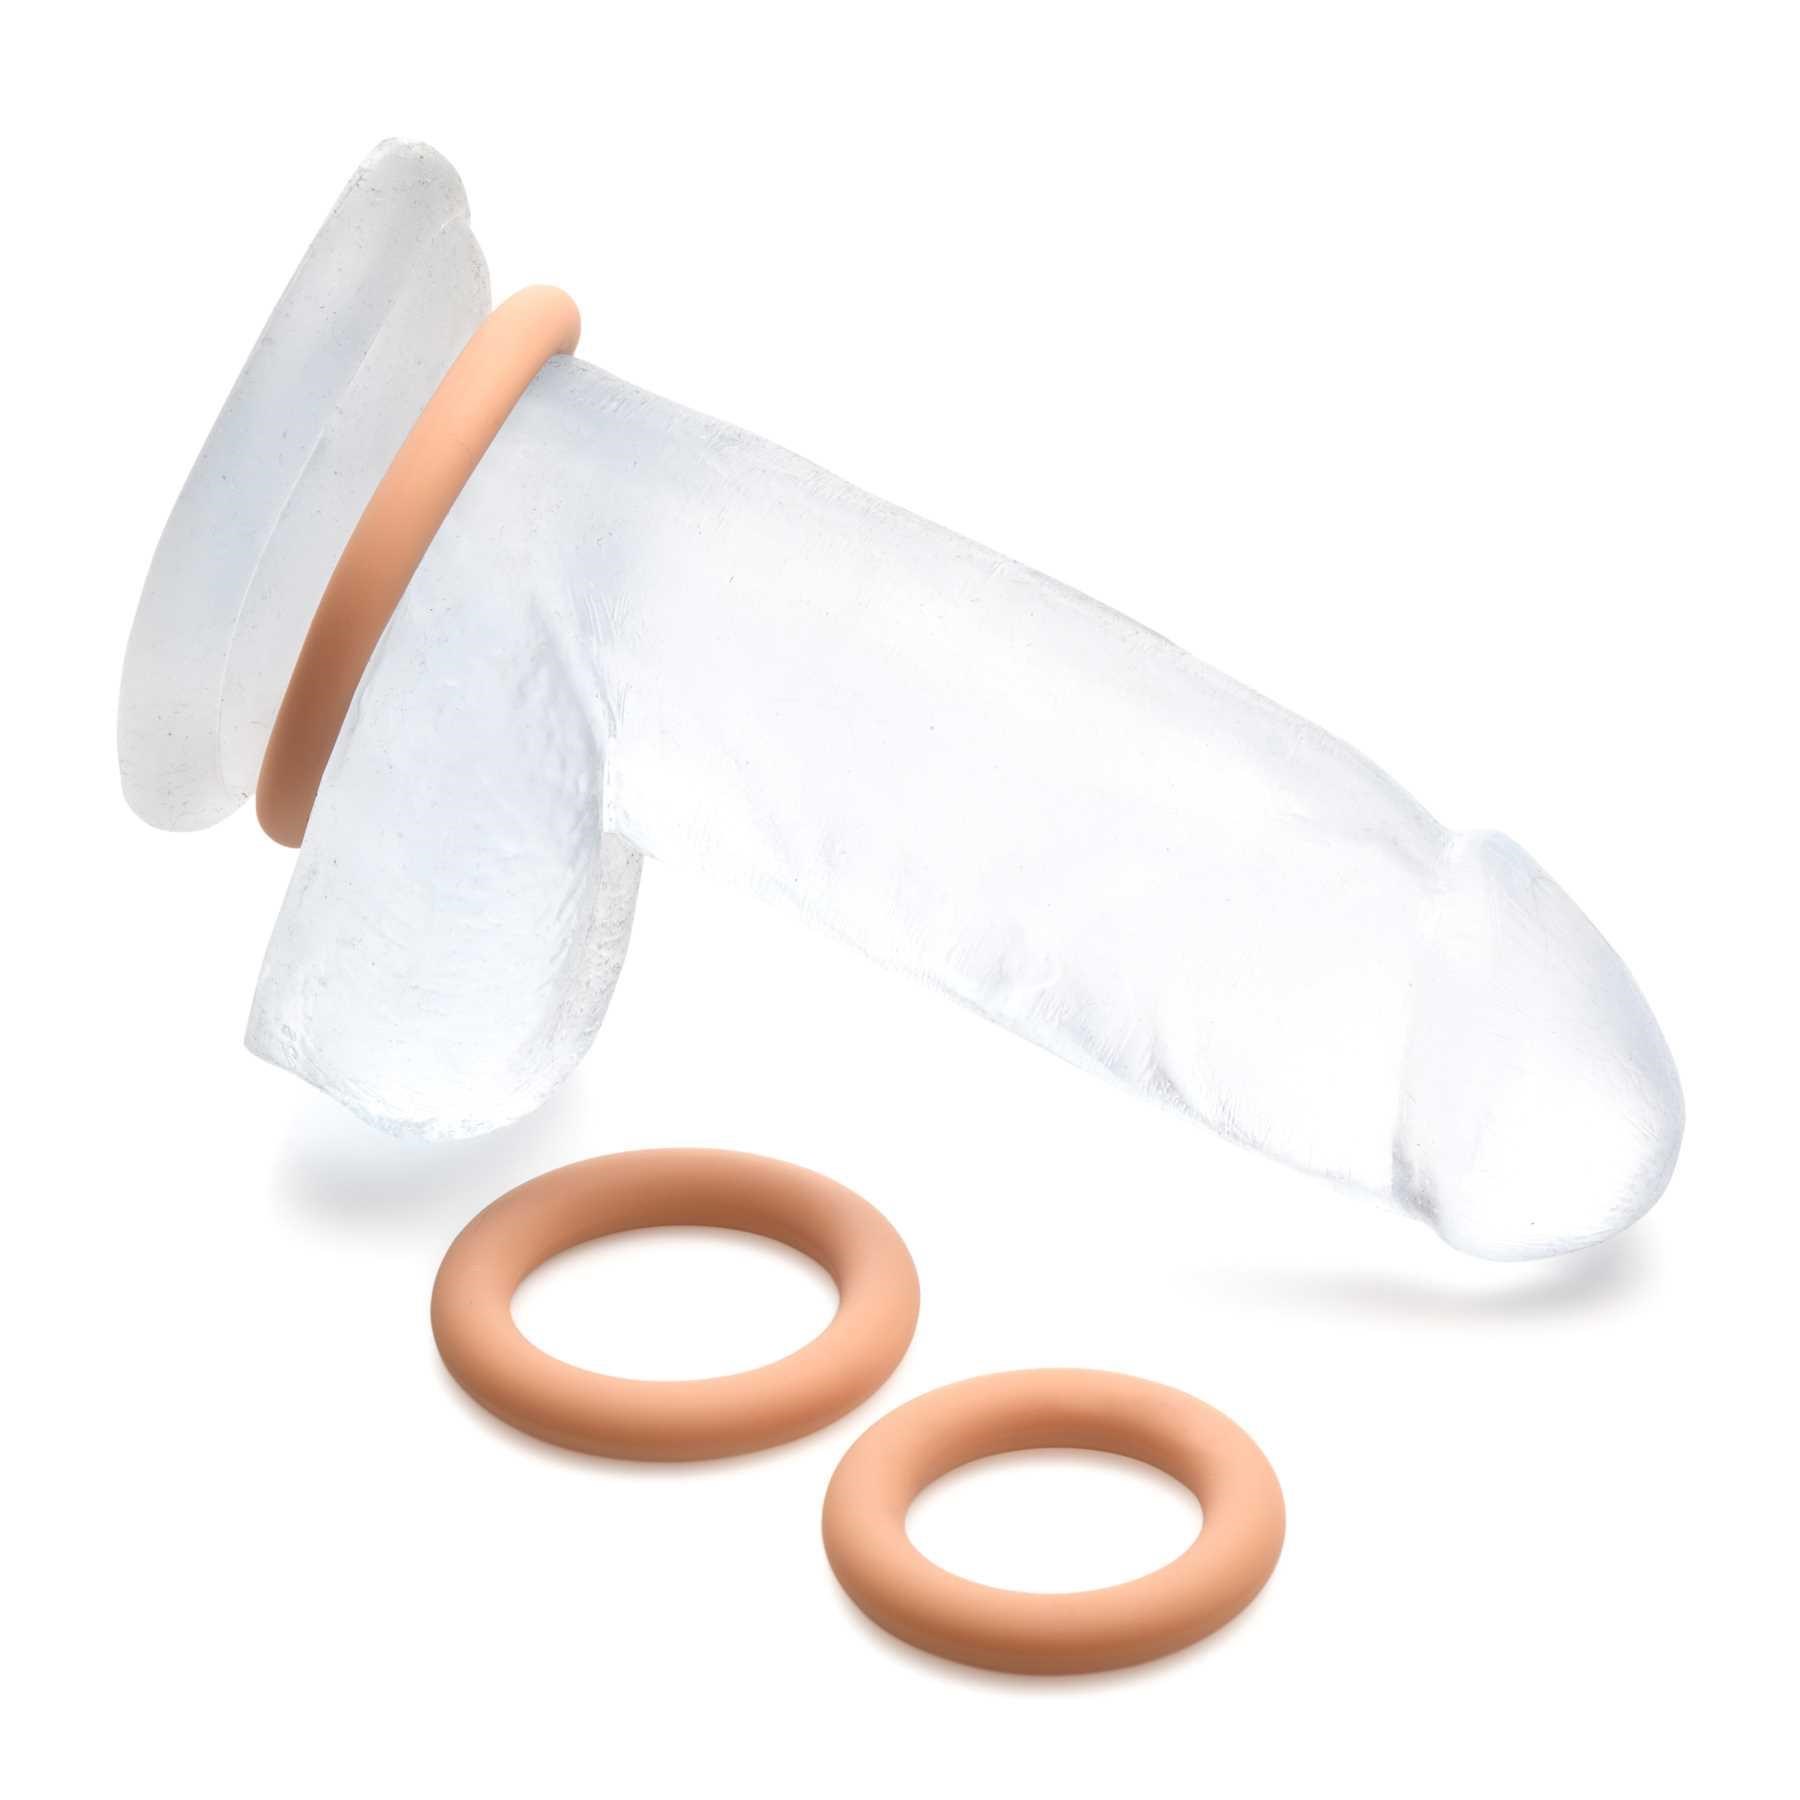 Jock Silicone Cock Ring Set tan with one ring on dildo and other 2 rings besides